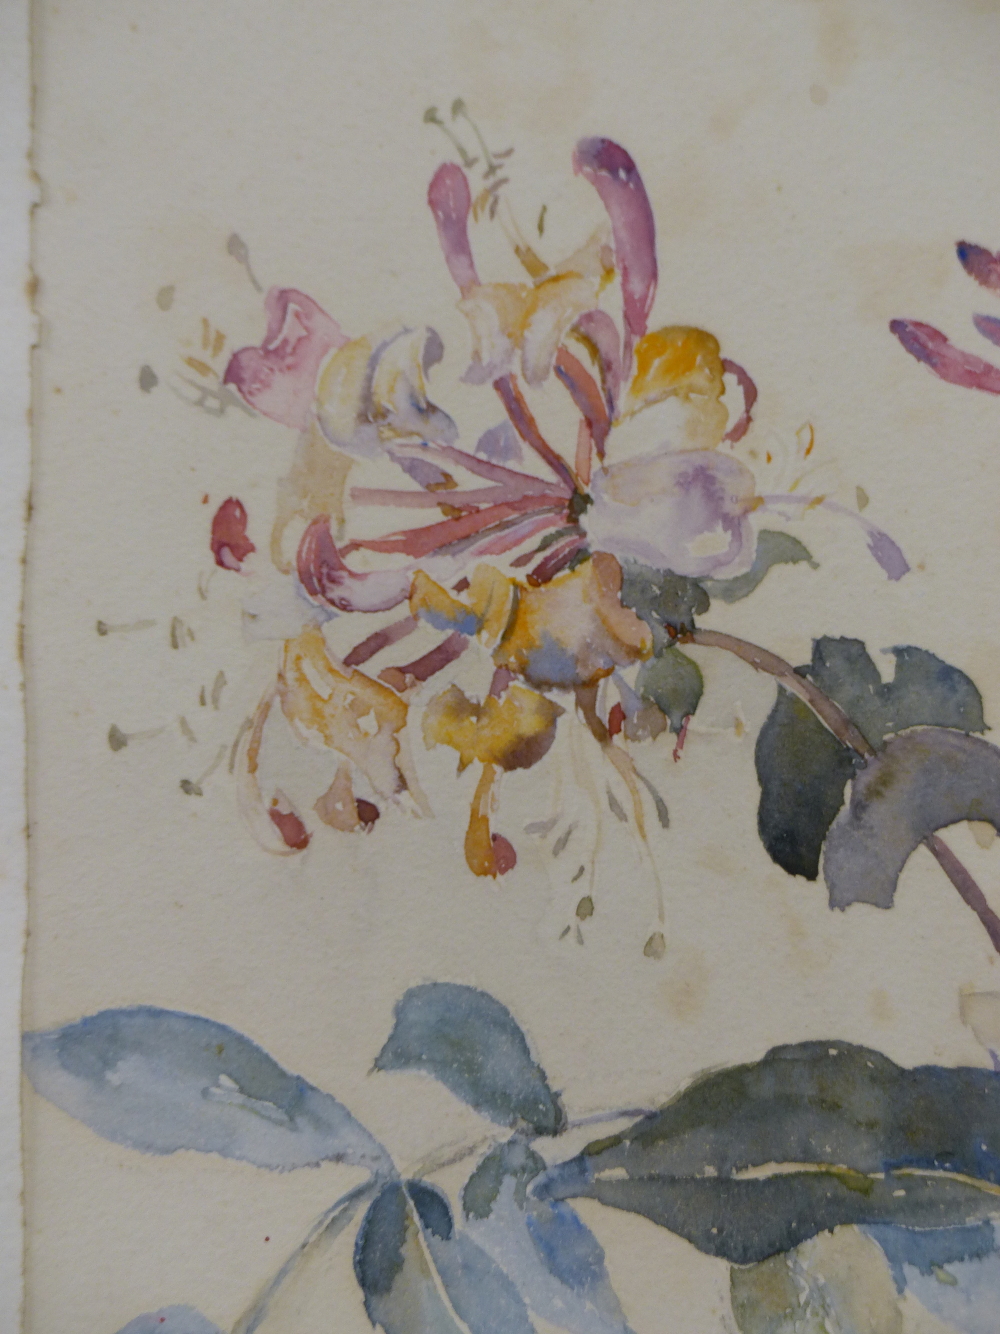 ENGLISH SCHOOL (EARLY 20TH CENTURY), STILL LIFE OF HONEYSUCKLE, WATERCOLOUR, 18 x 24.5cm, TOGETHER - Image 2 of 3